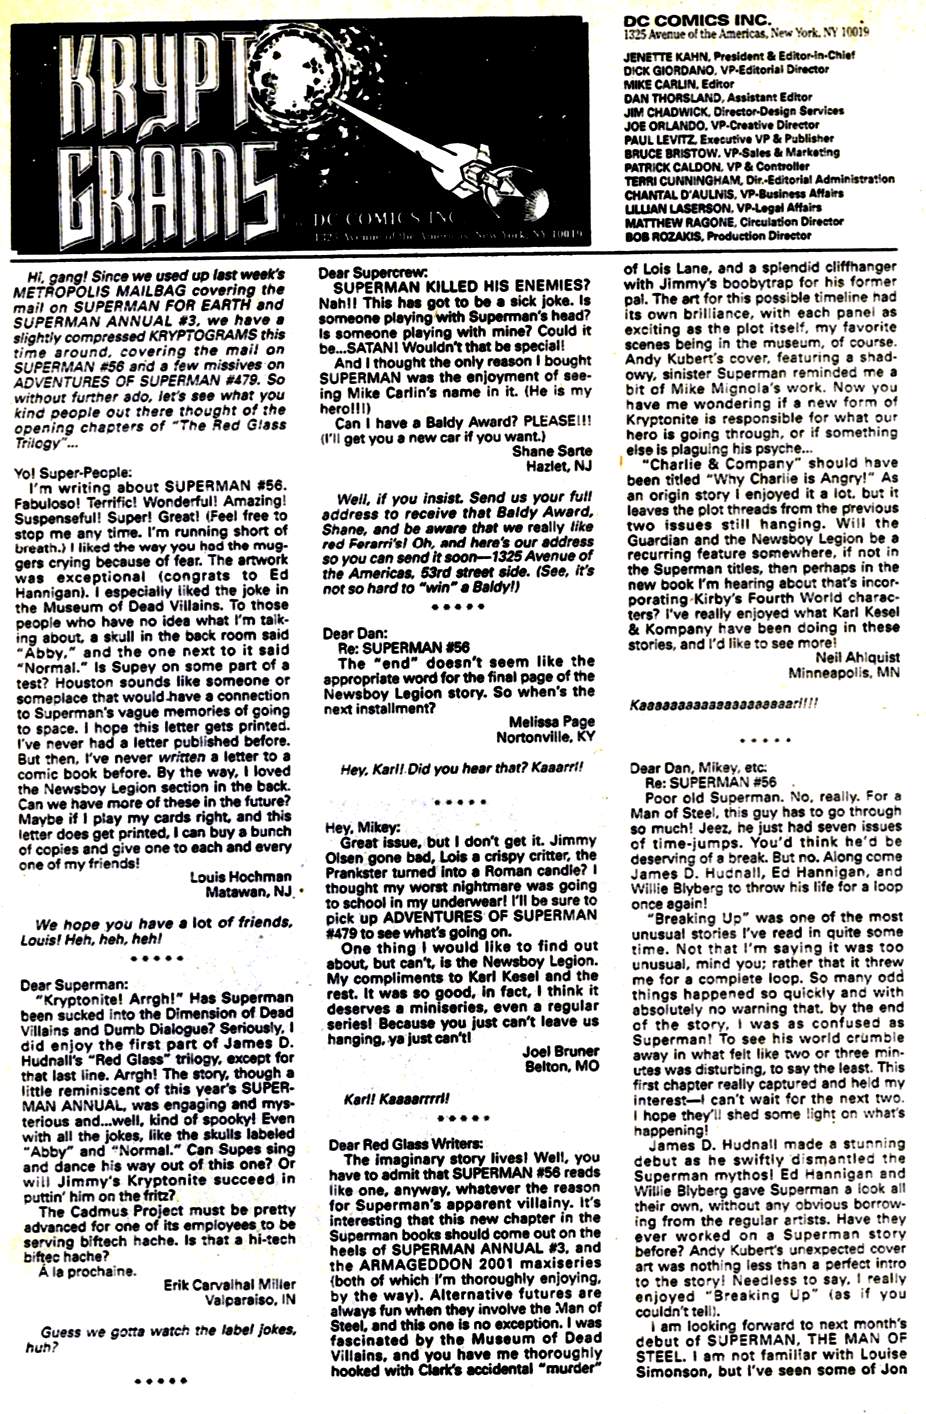 Adventures of Superman (1987) 483 Page 23